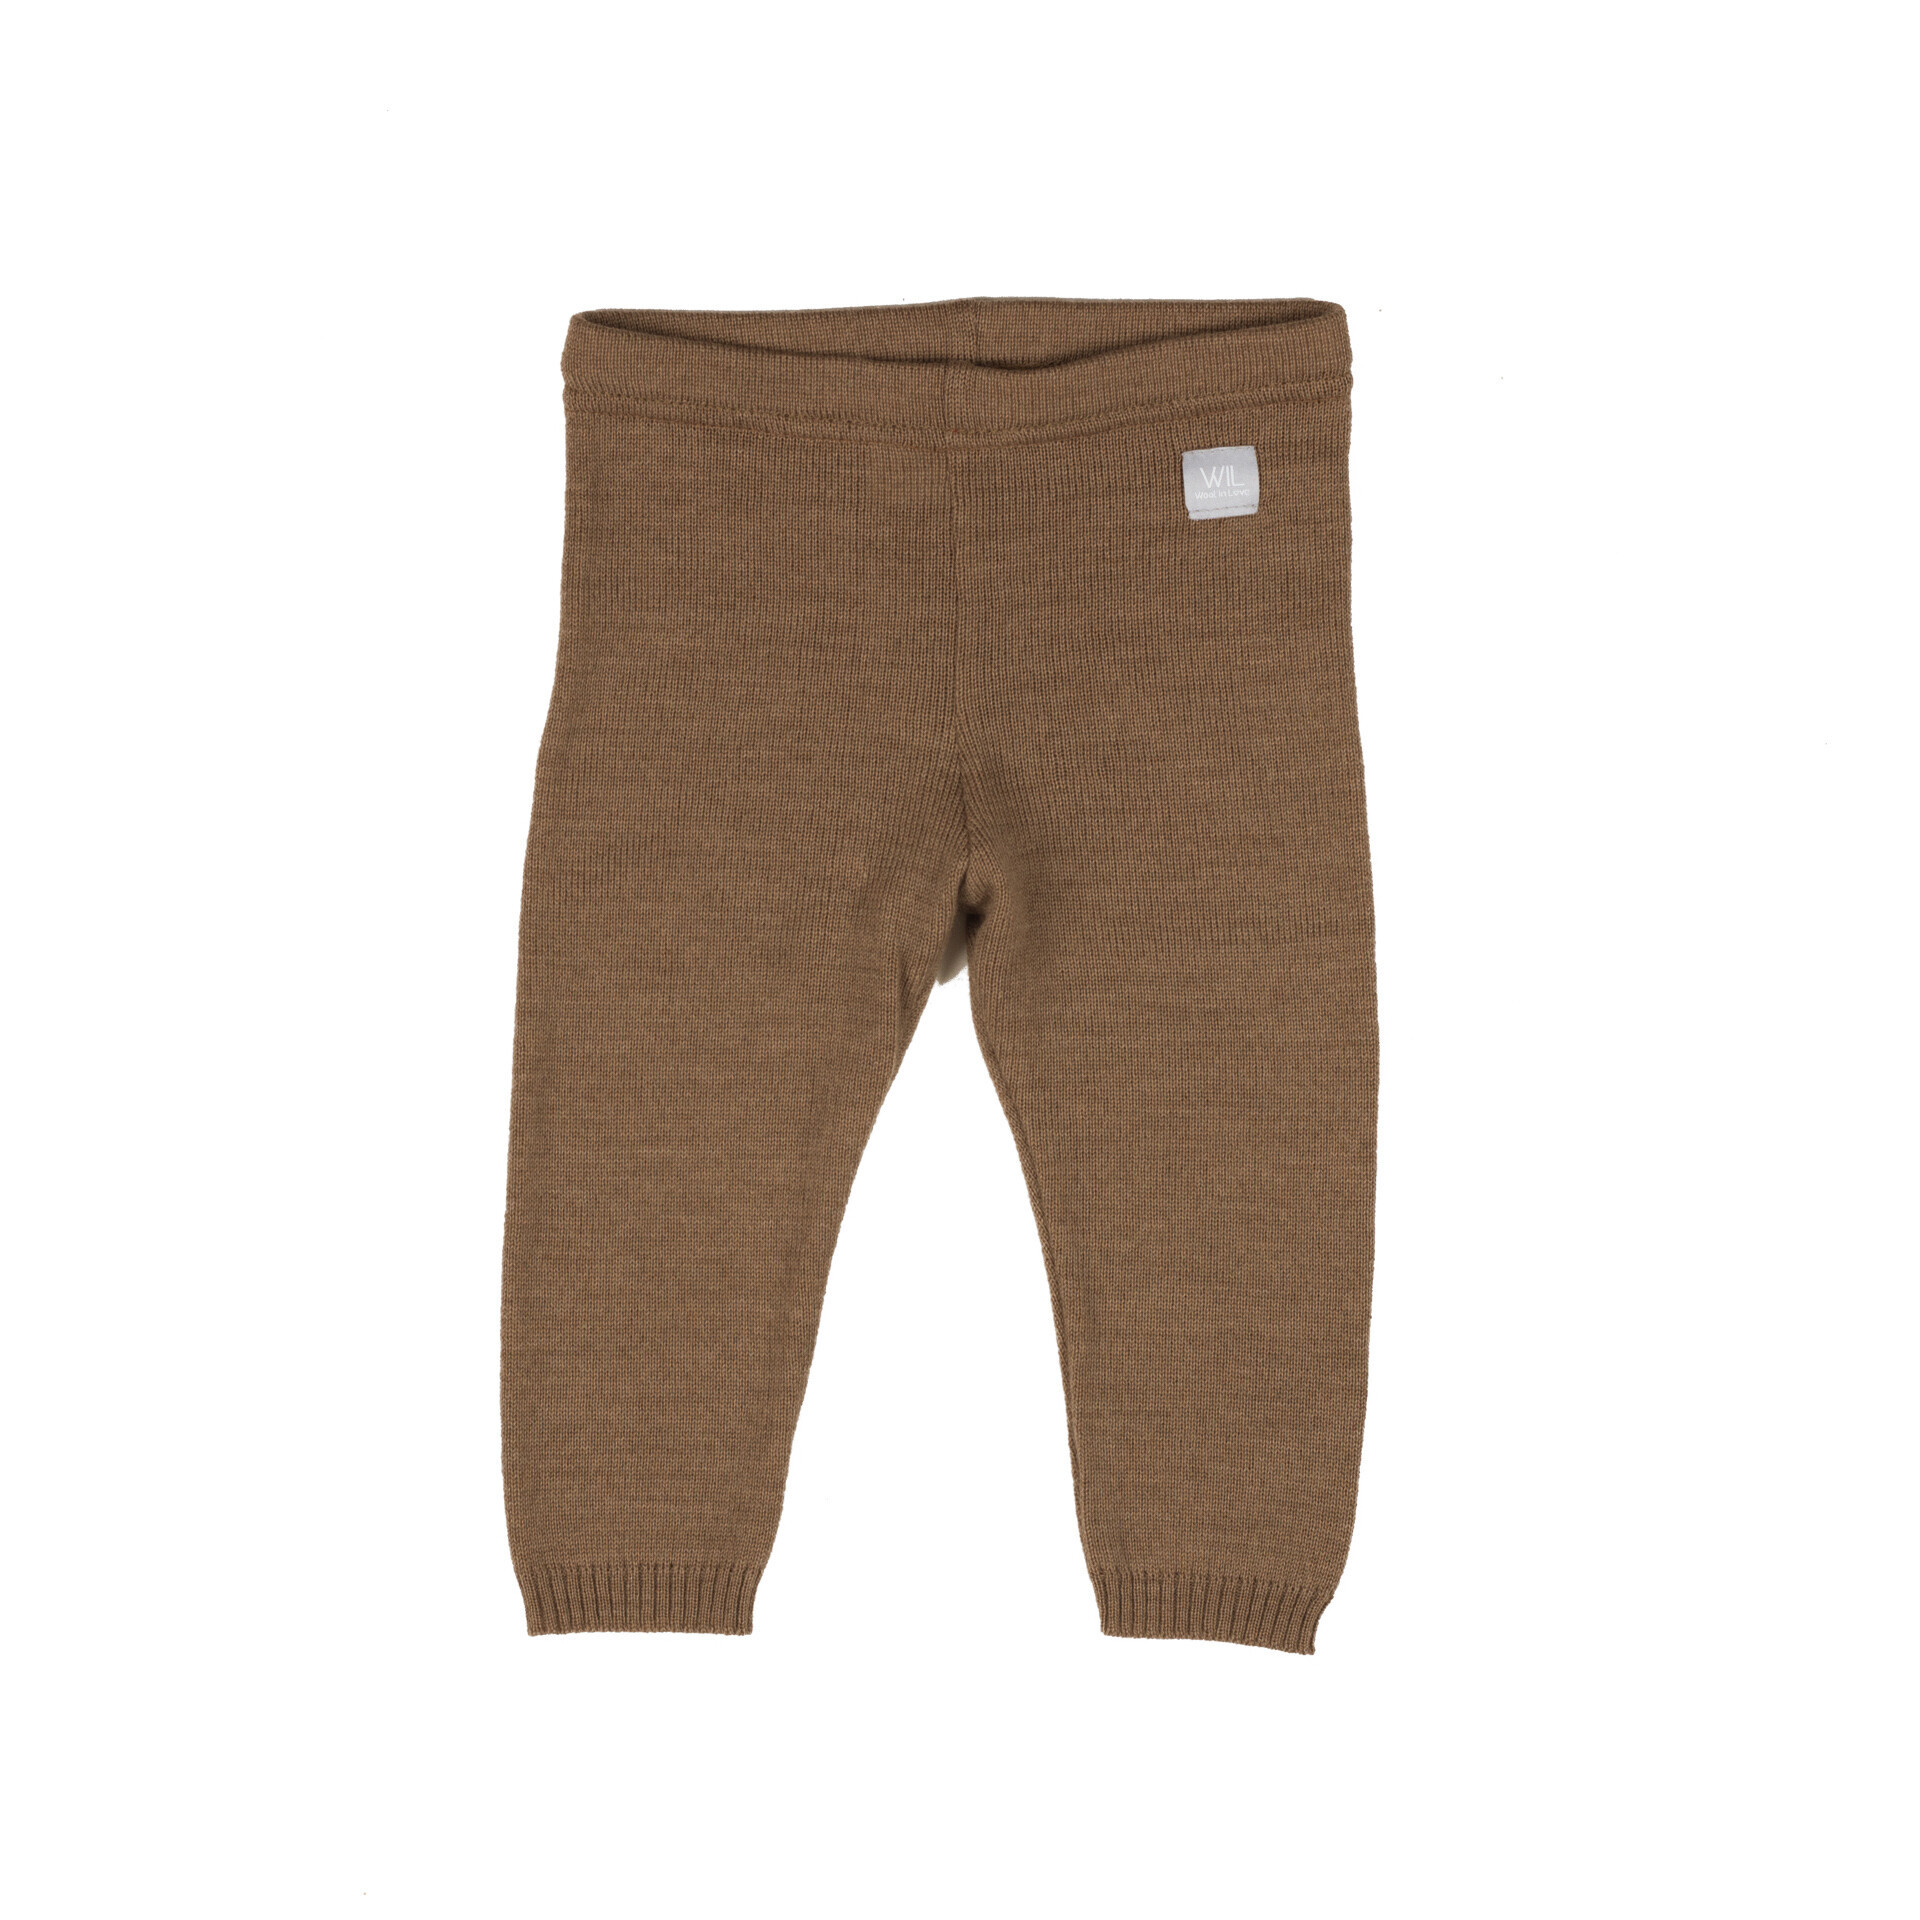 Natural Woollies Unisex Leggings with Knee Patches by ManyMonths -  Jillian's Drawers